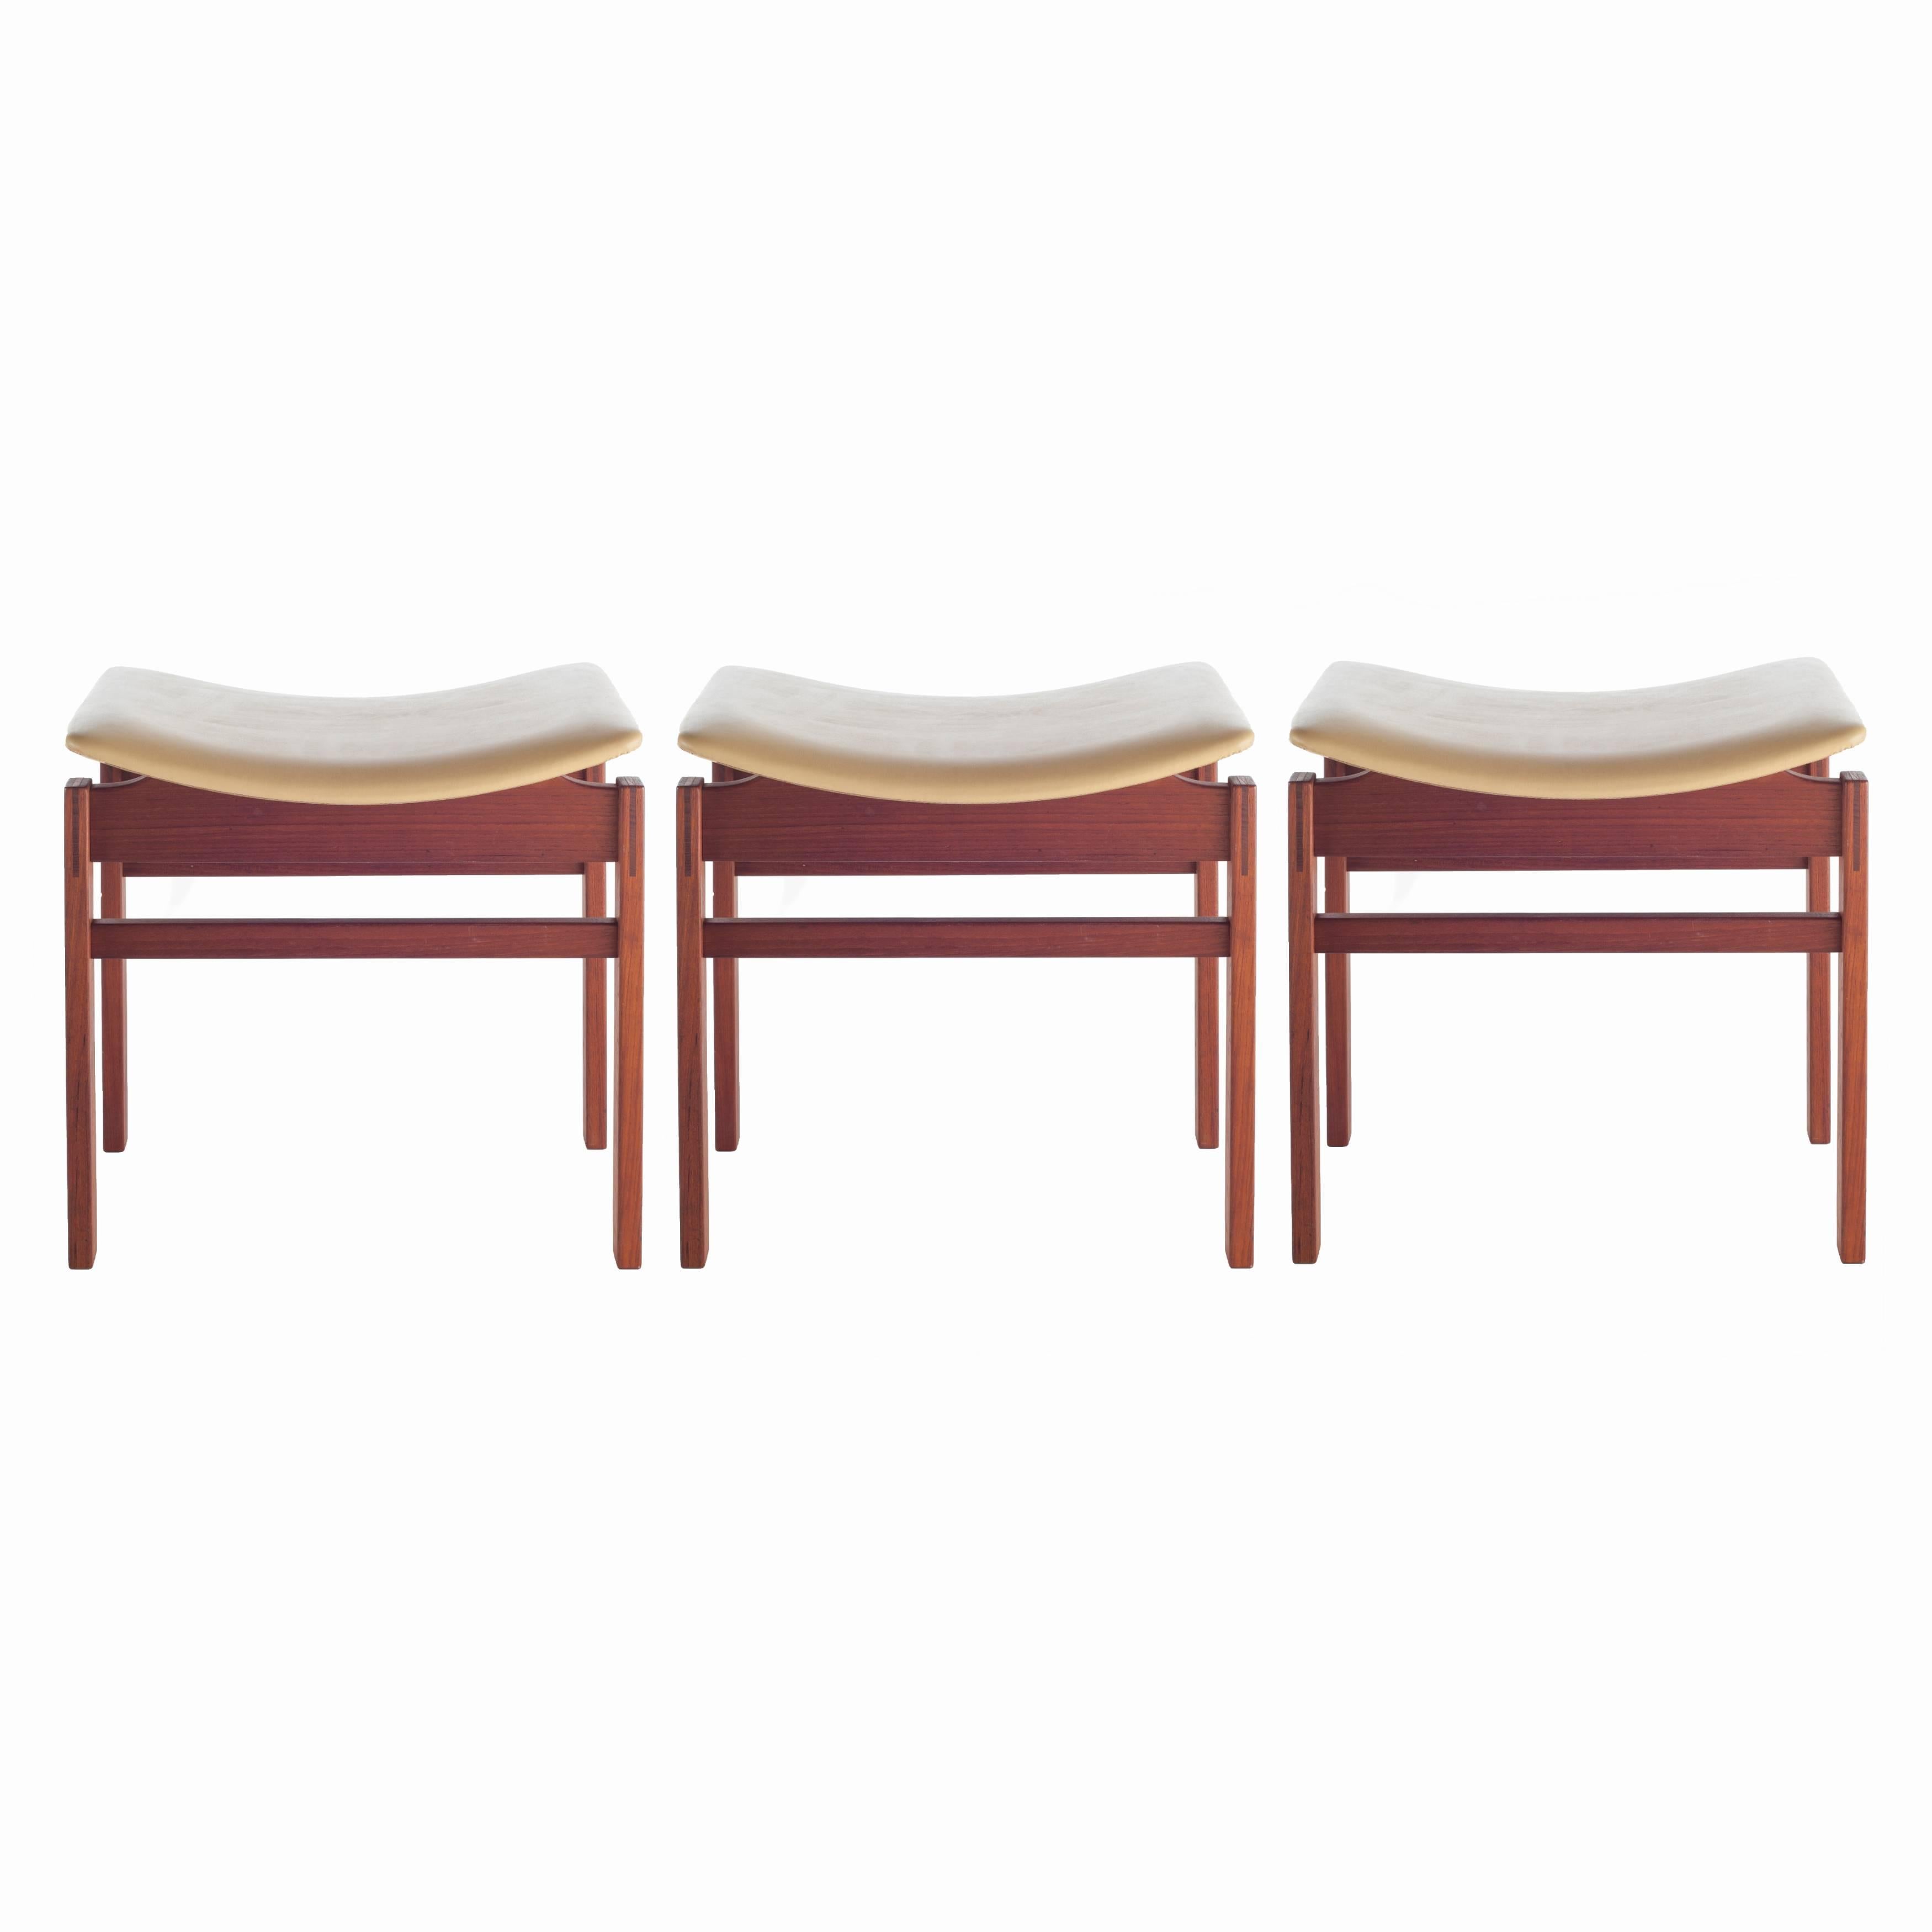 Set of Three Walnut and Leather Stools by Jens Risom, circa 1950s For Sale